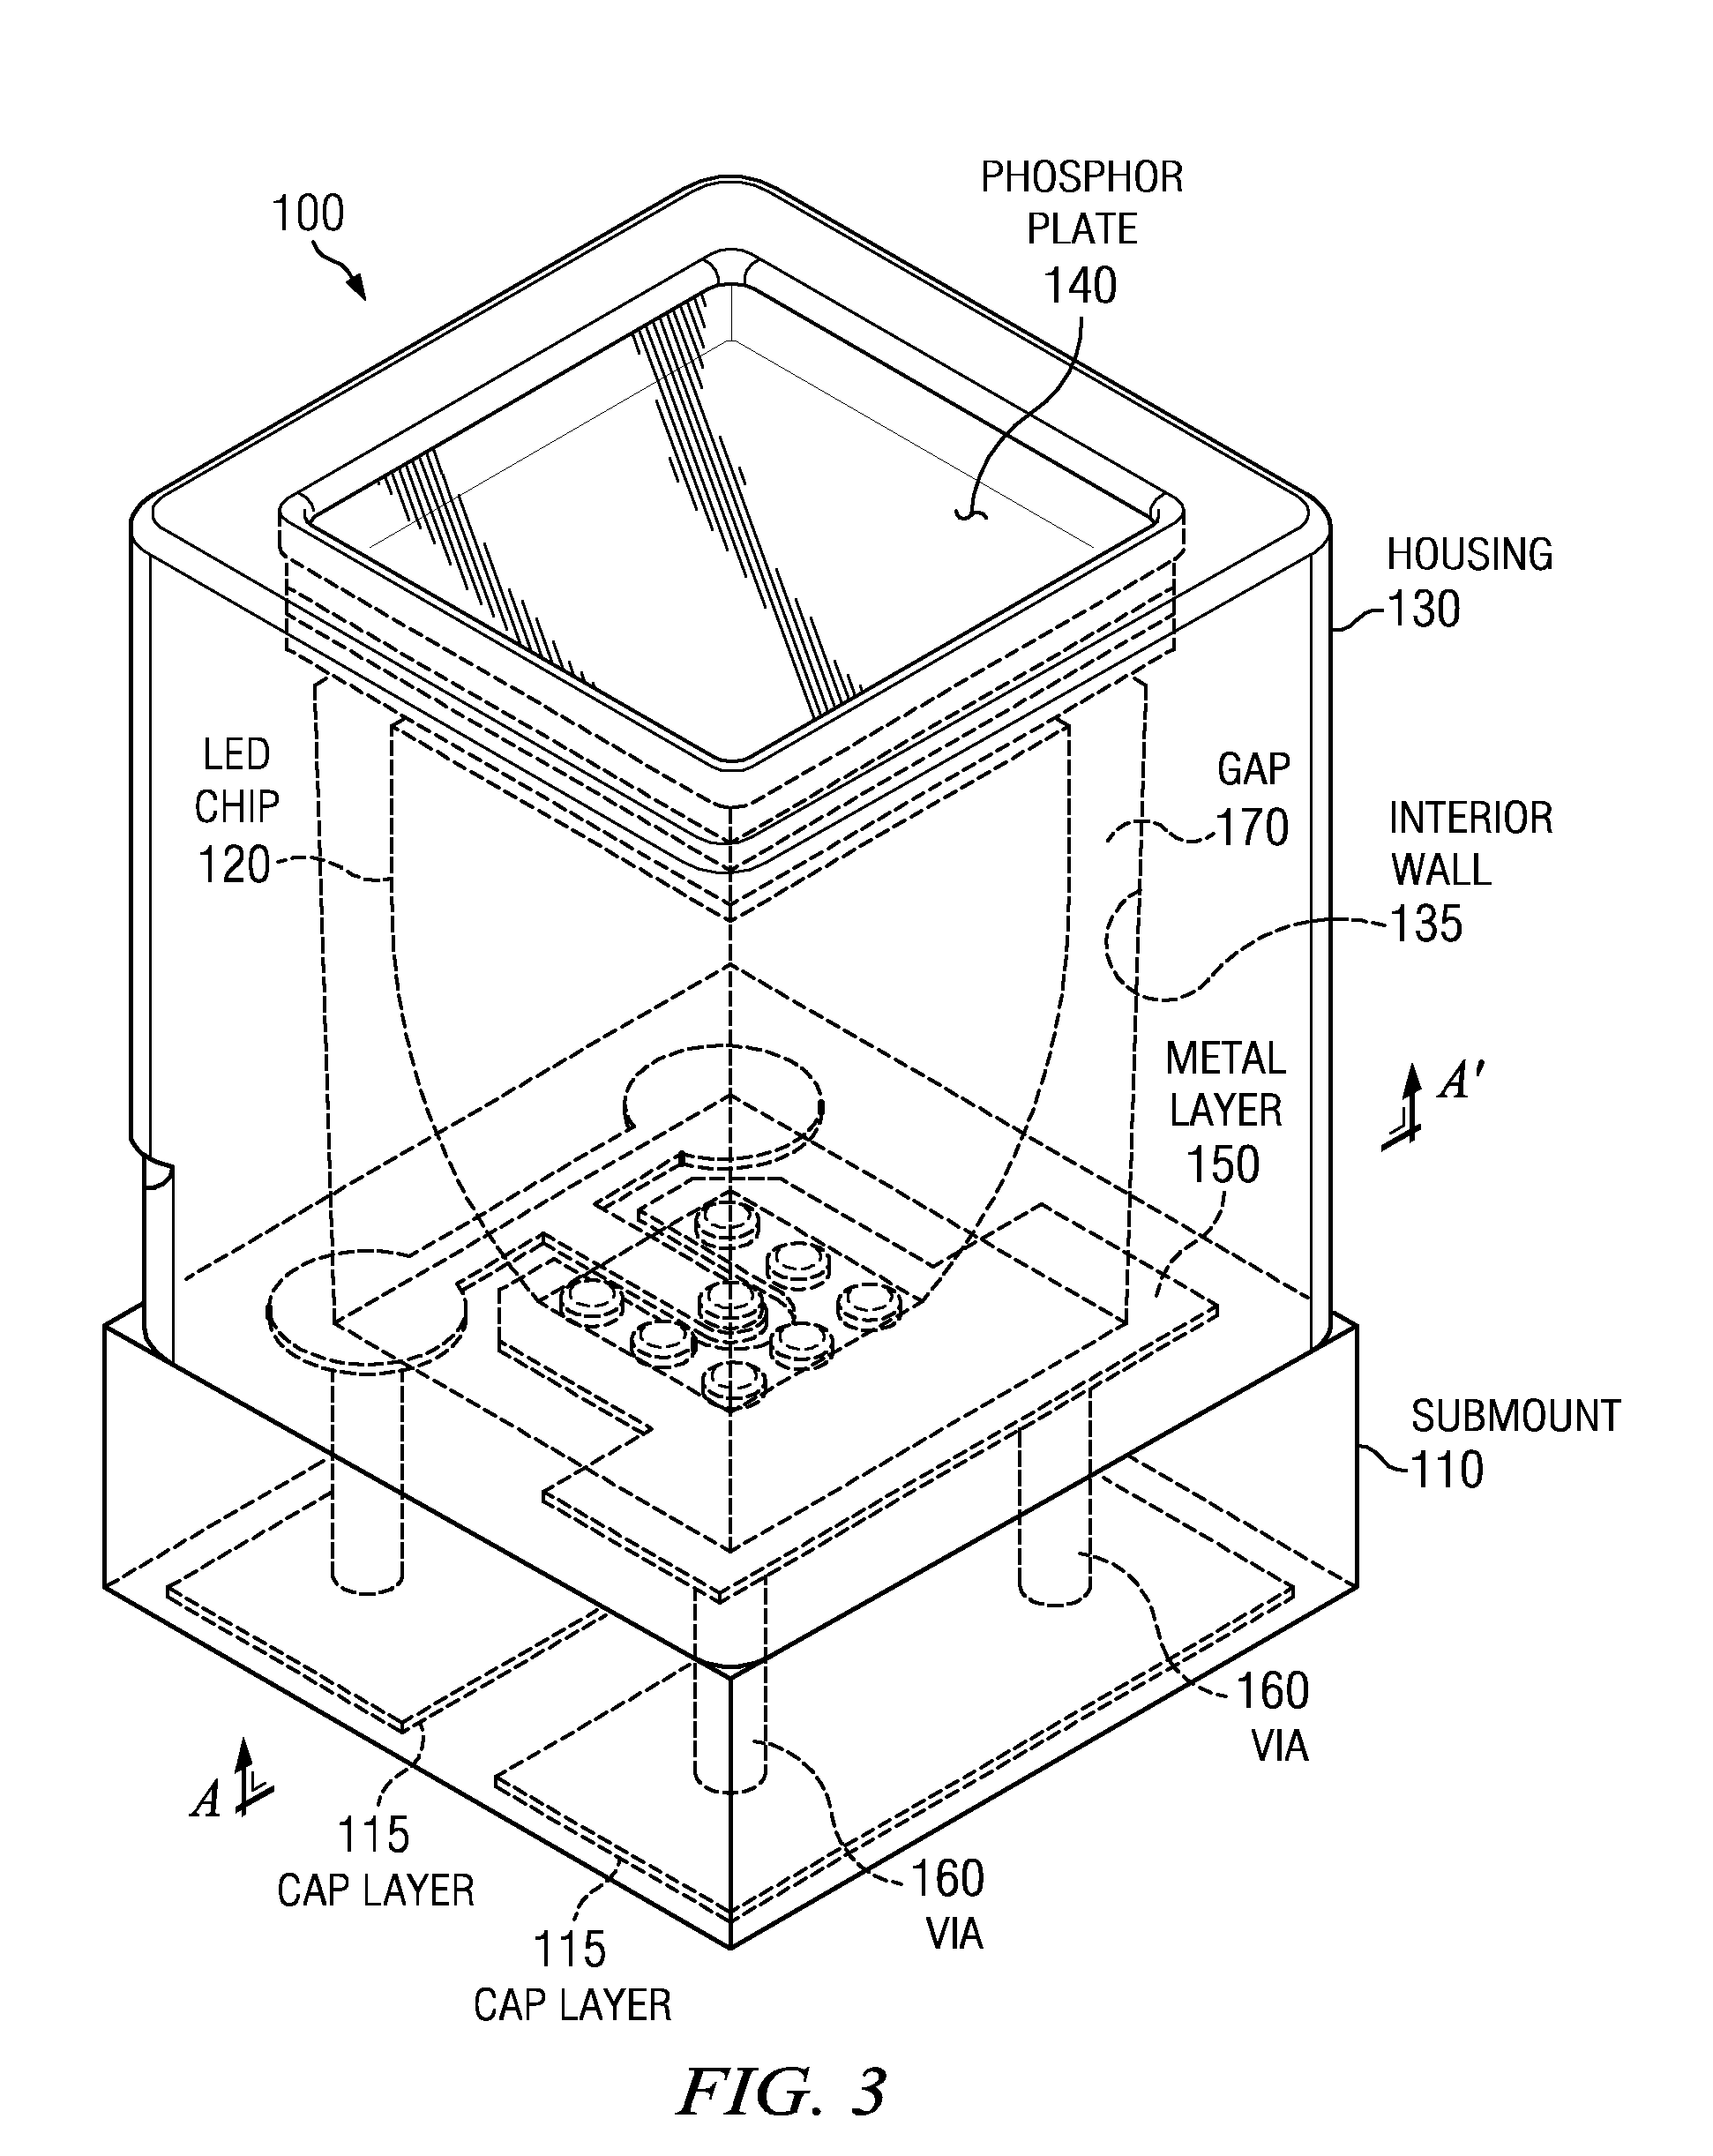 Systems and methods for packaging light-emitting diode devices